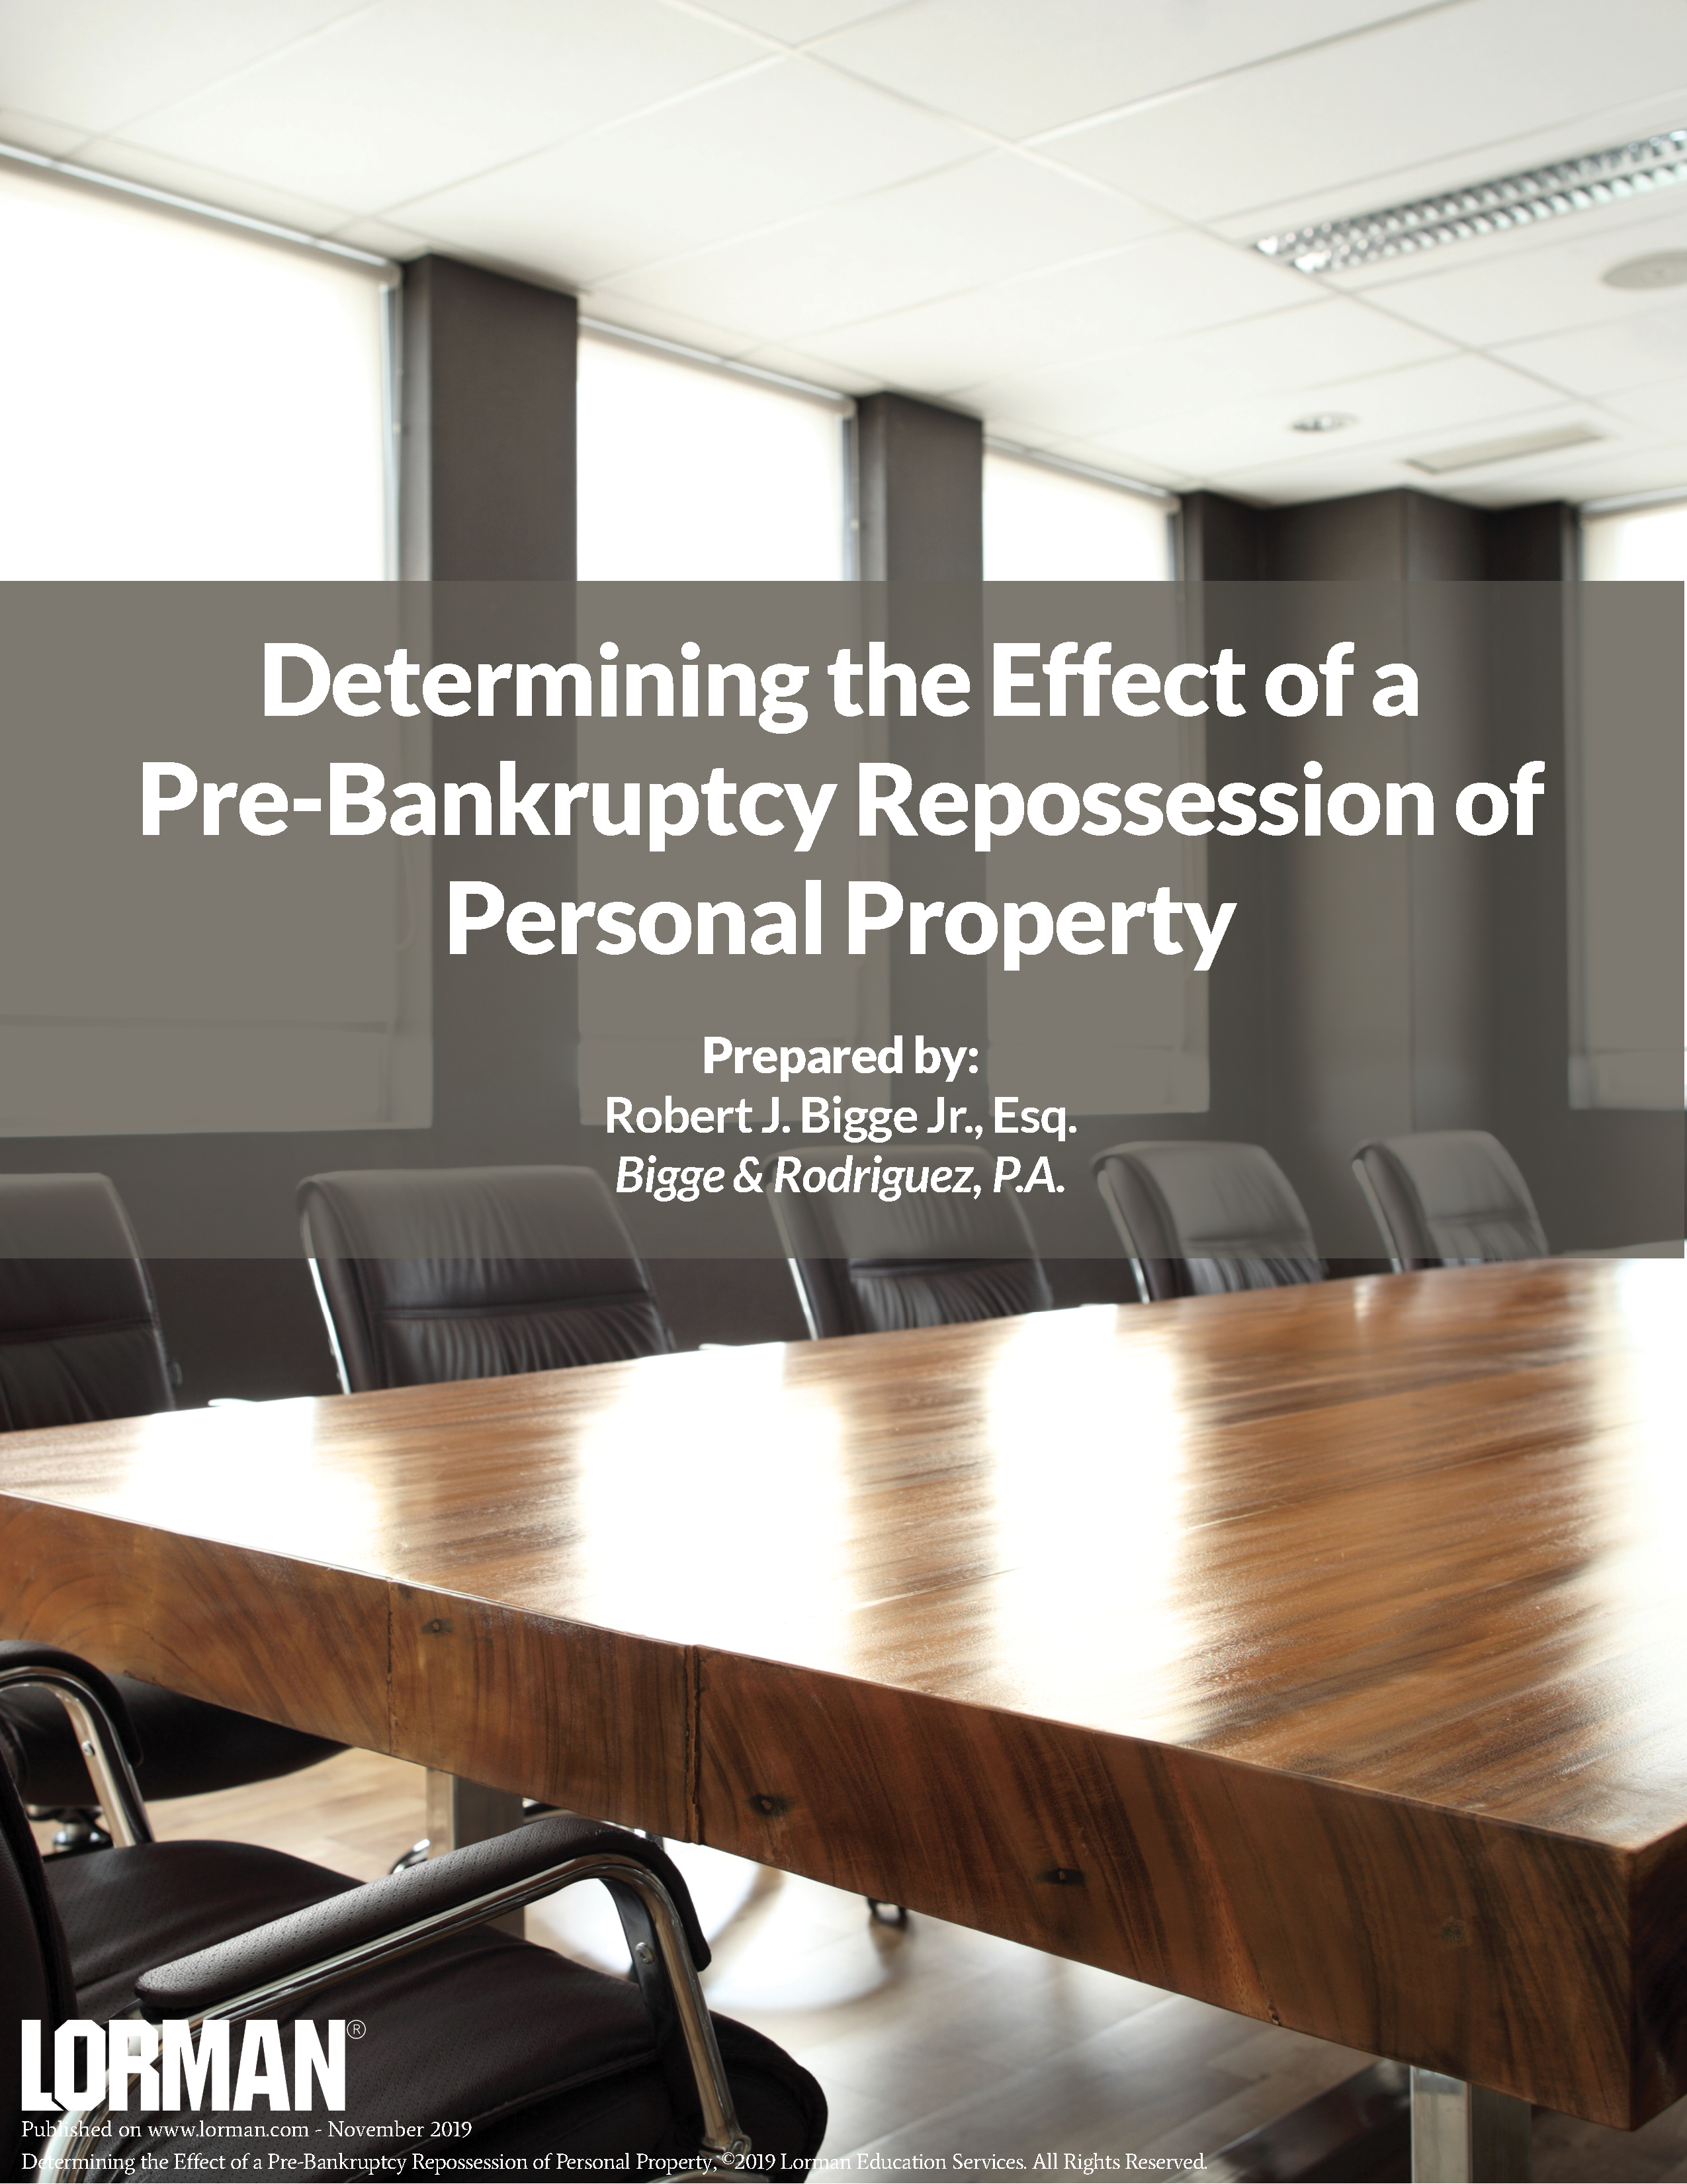 Determining the Effect of a Pre-Bankruptcy Repossession of Personal Property